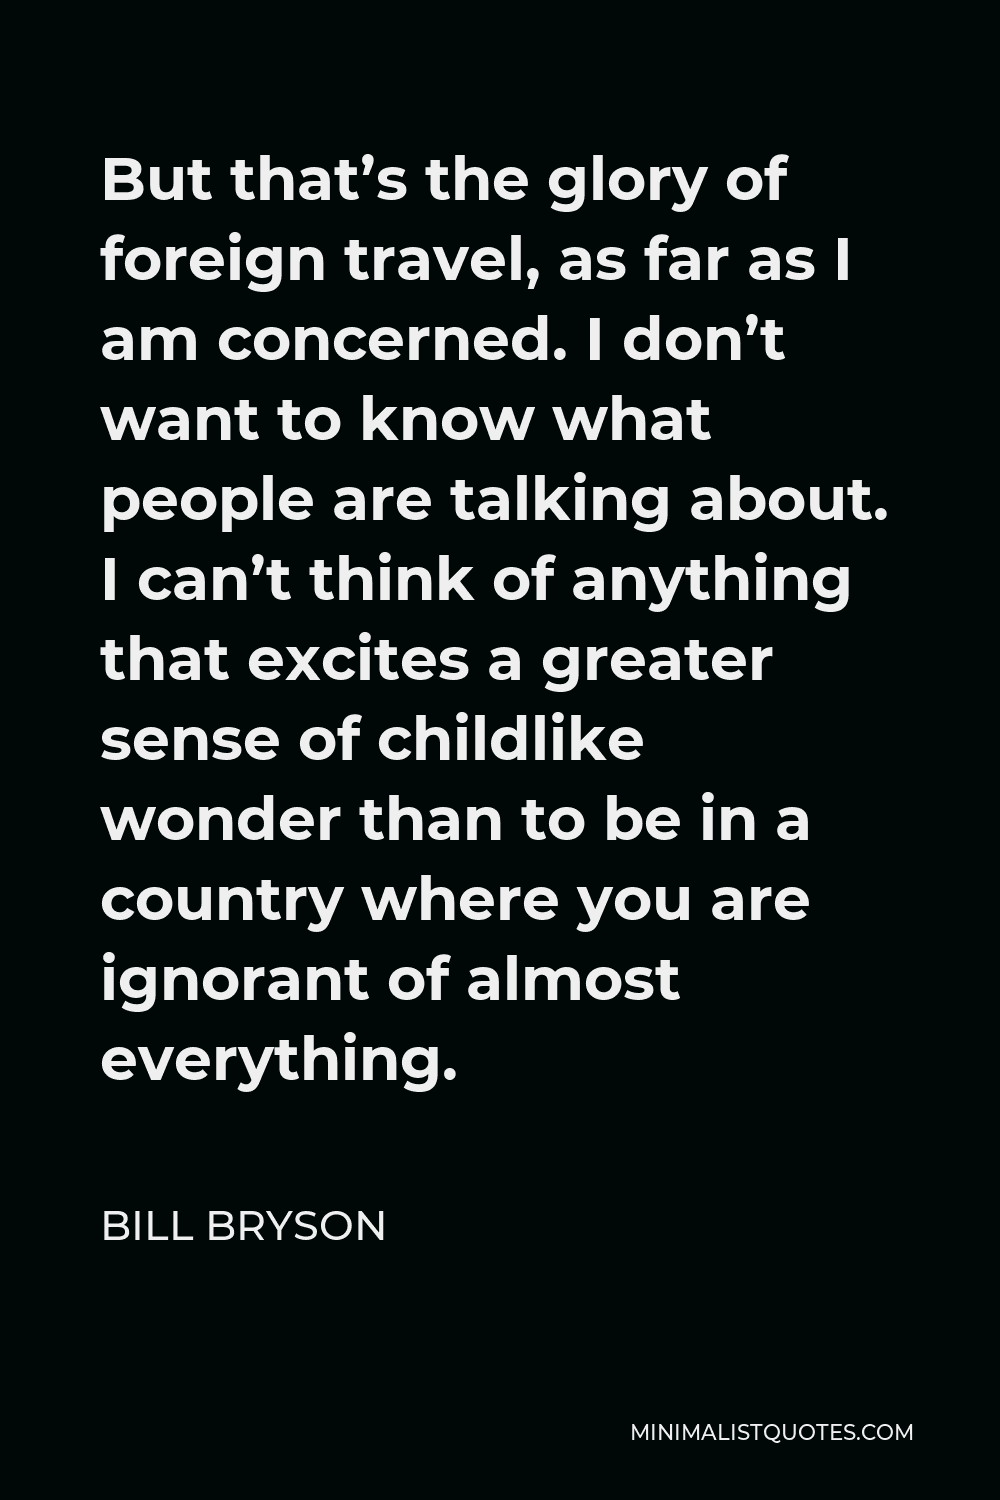 Bill Bryson Quote - But that’s the glory of foreign travel, as far as I am concerned. I don’t want to know what people are talking about. I can’t think of anything that excites a greater sense of childlike wonder than to be in a country where you are ignorant of almost everything.